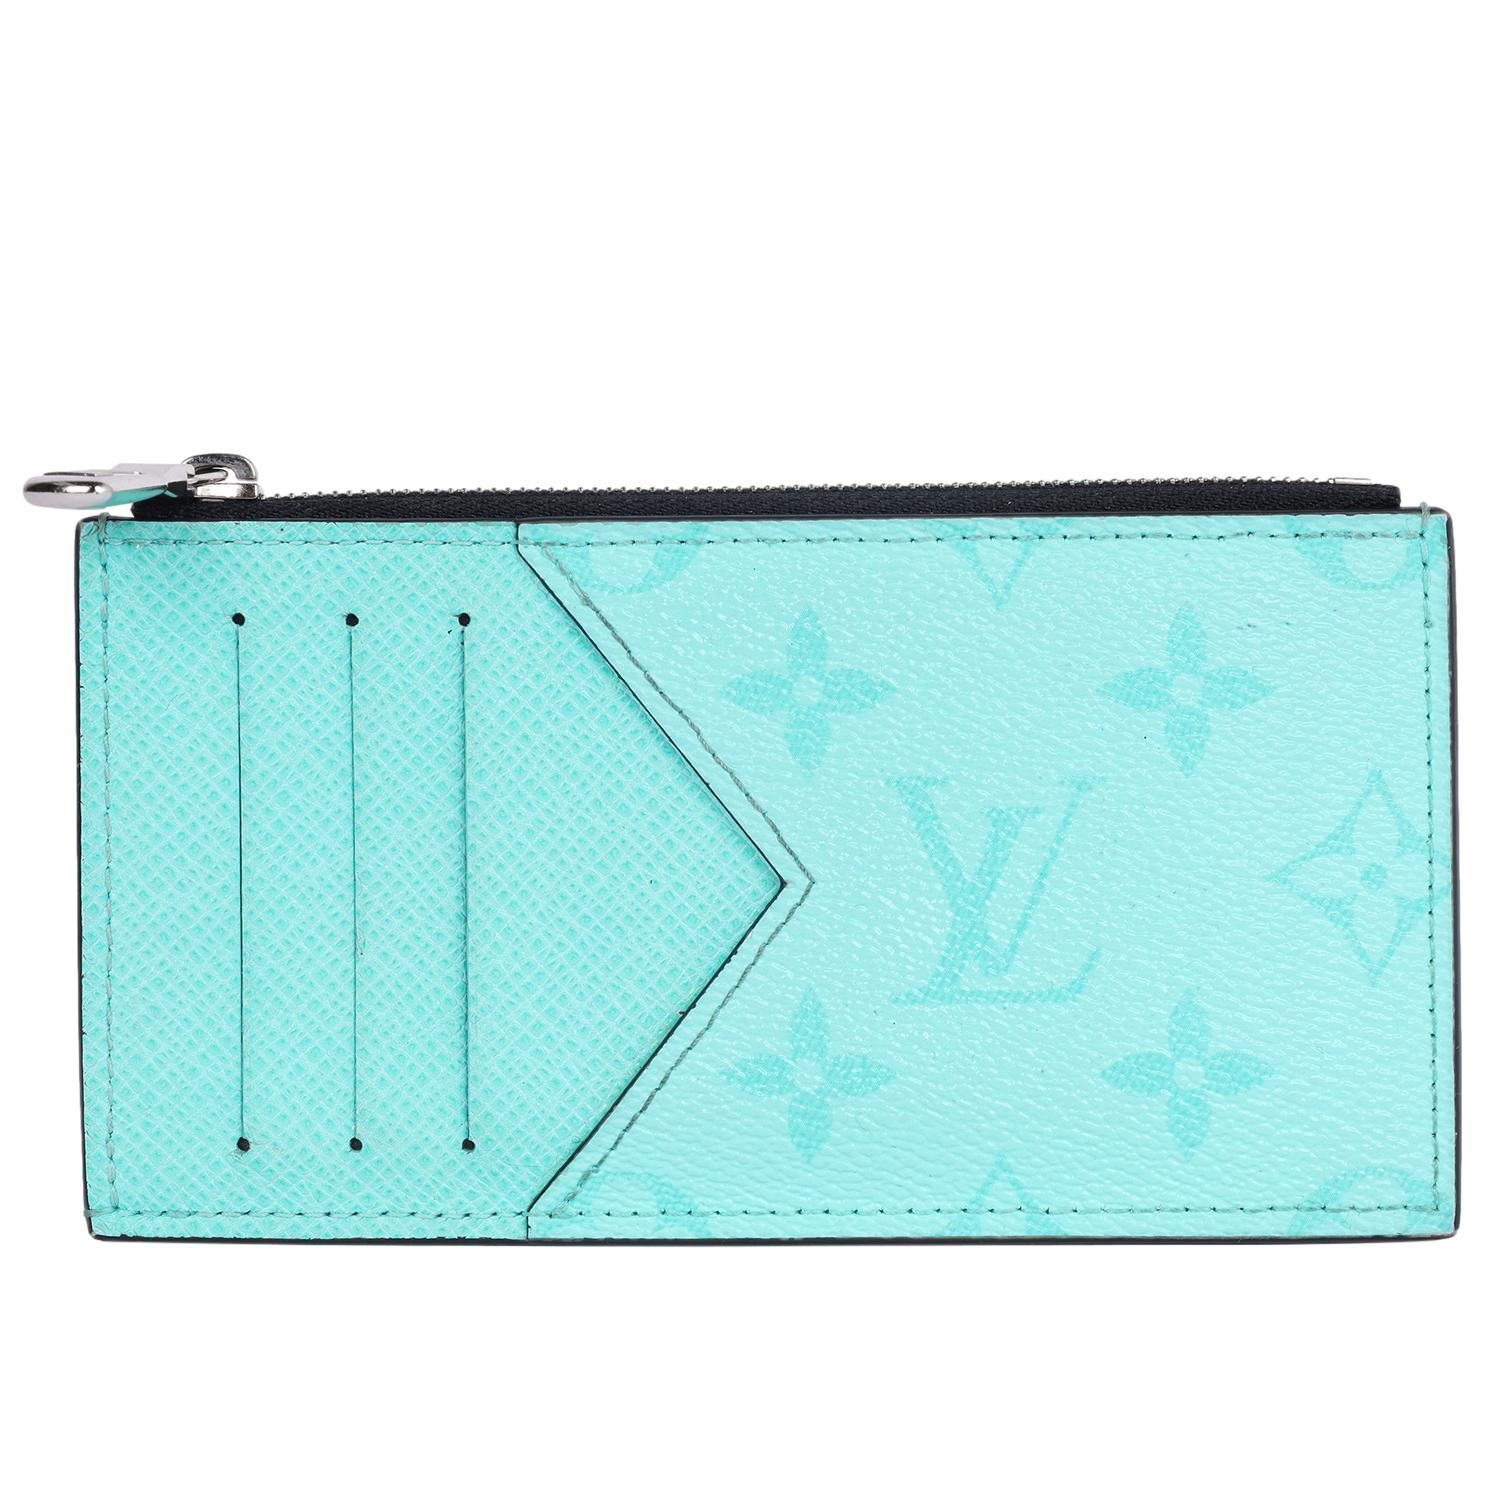 Authentic, pre-loved Louis Vuitton Taigarama Coin Card Holder in Miami Green. This thin cardholder features traditional monogram canvas in green with taiga cross-grain leather trim. The cardholder features a rear slip pocket, 4 credit card slots on